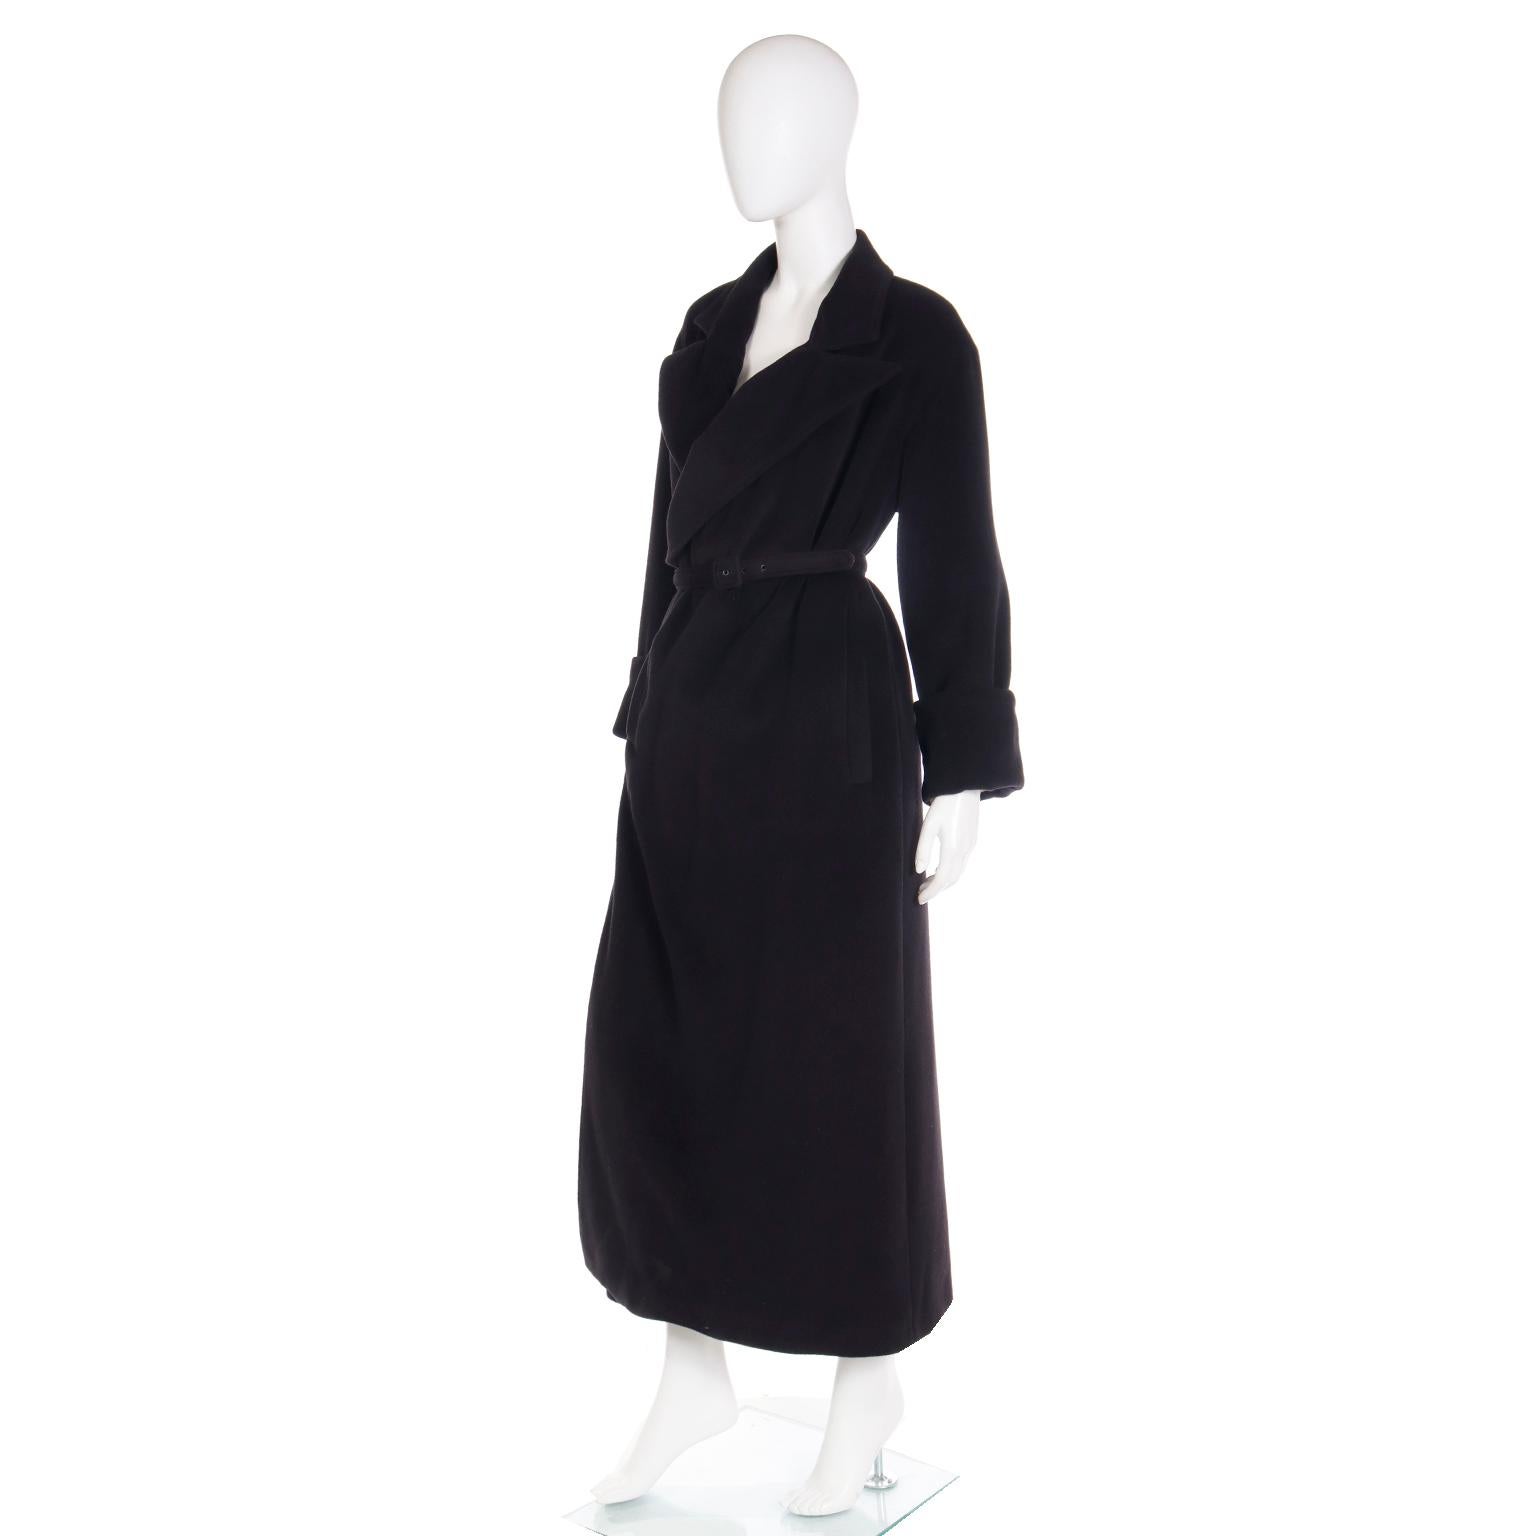 F/W 2000 Jean Paul Gaultier Black Angora Wool Coat with Belt & Signature LIning In Good Condition For Sale In Portland, OR